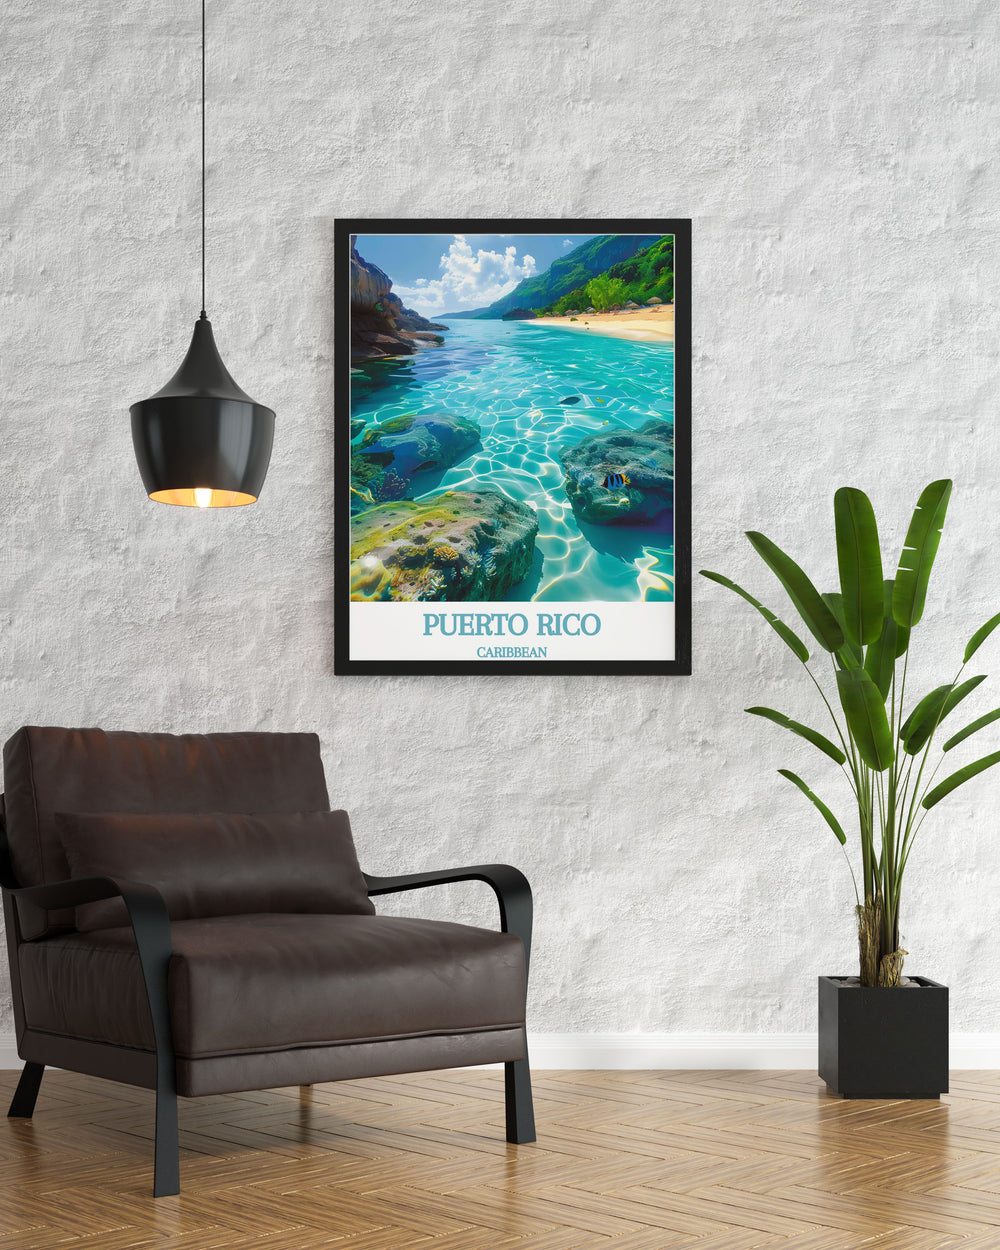 Beautiful Arecibo poster showcasing the majestic CARIBBEAN, Culebra and Vieques Biosphere Reserve. This vintage print adds a touch of natural charm to any space. Great for personalized gifts or as part of a travel poster collection.